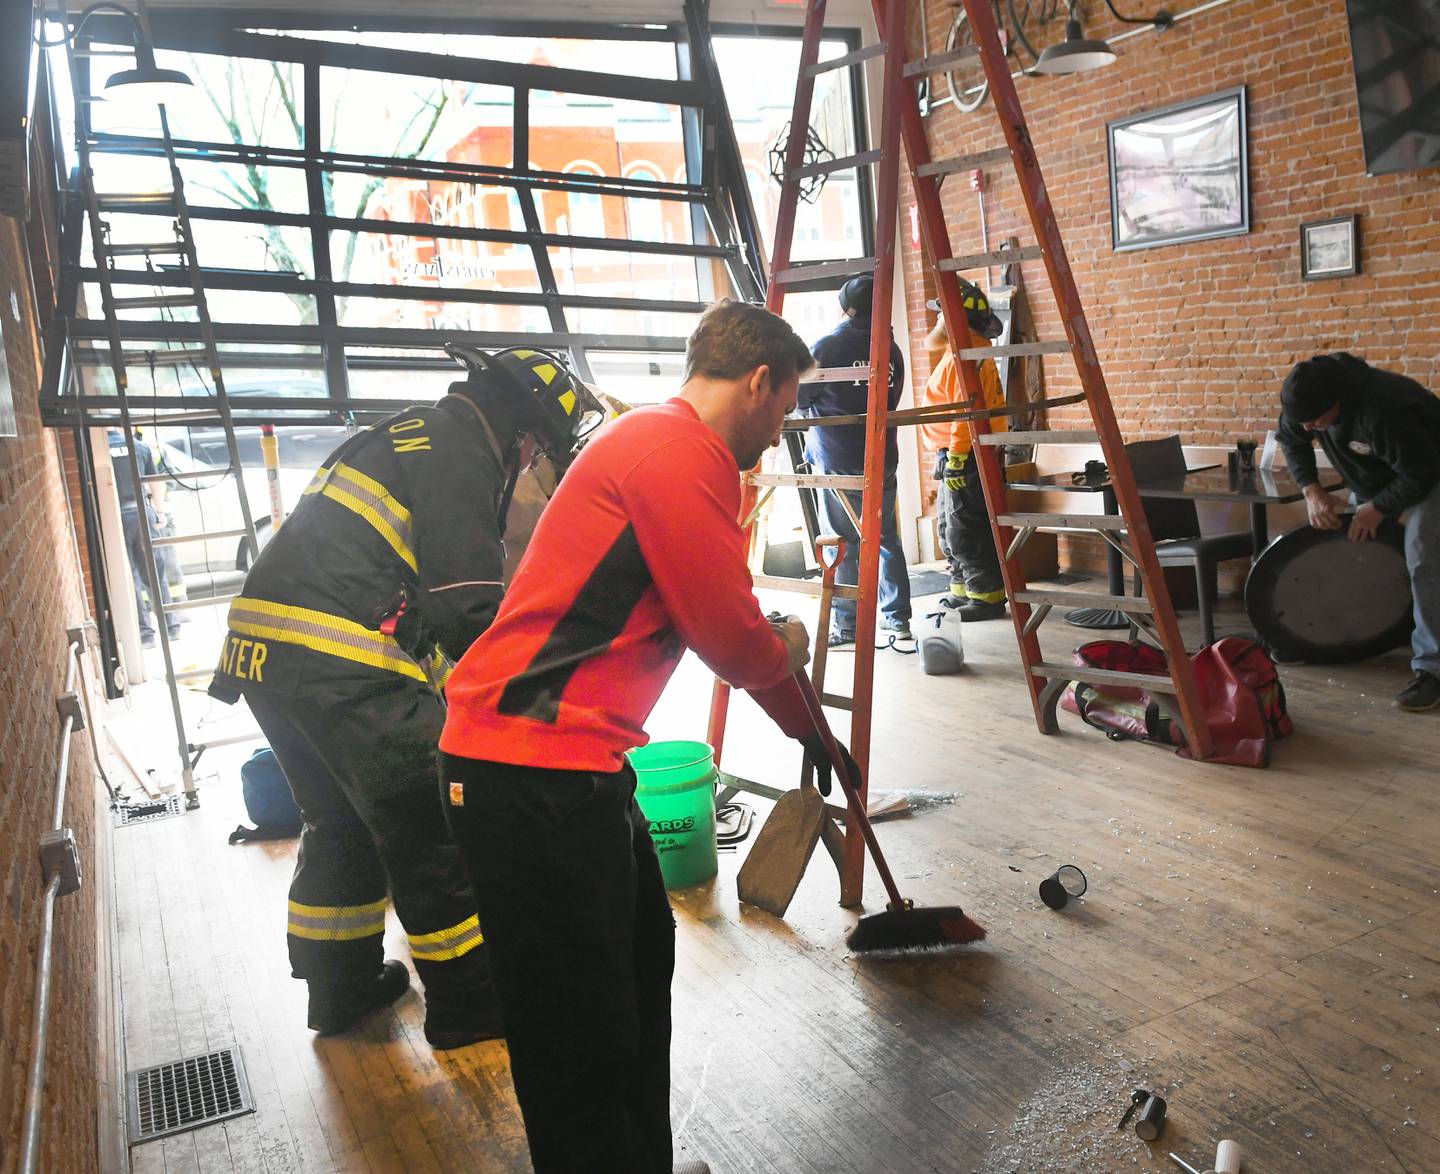 A car crashed into the Ogle County Brewery in downtown Oregon after being struck by another vehicle at the intersection of Illinois 64 and Illinois 2 Sunday afternoon, Dan Gale, Oregon, and firefighters Guards are cleaning up broken glass. Dan's father Mark was one of them or the building's owner.